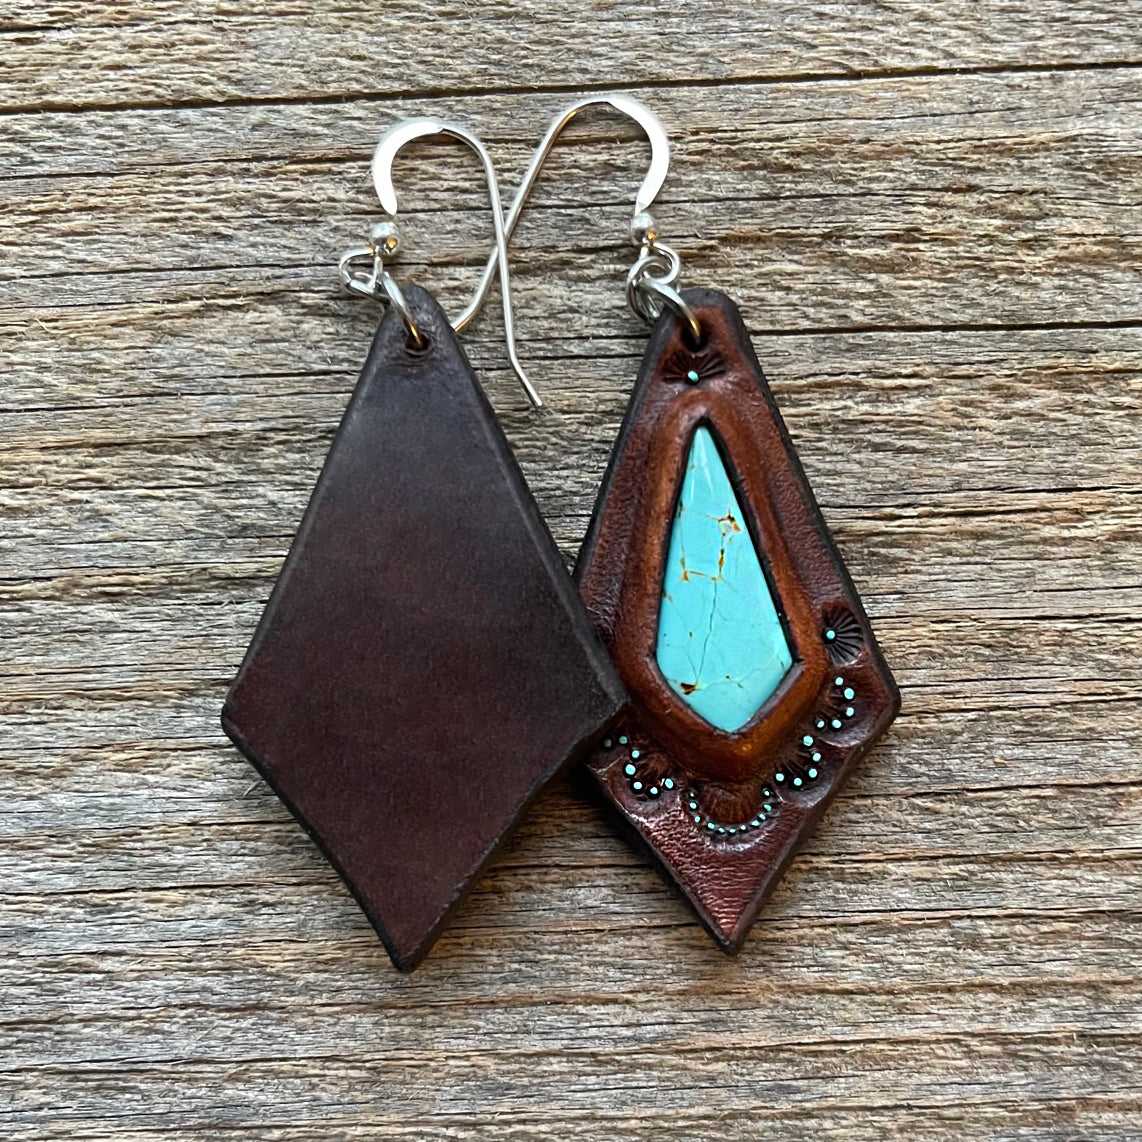 Genuine turquoise leather earrings - MKT